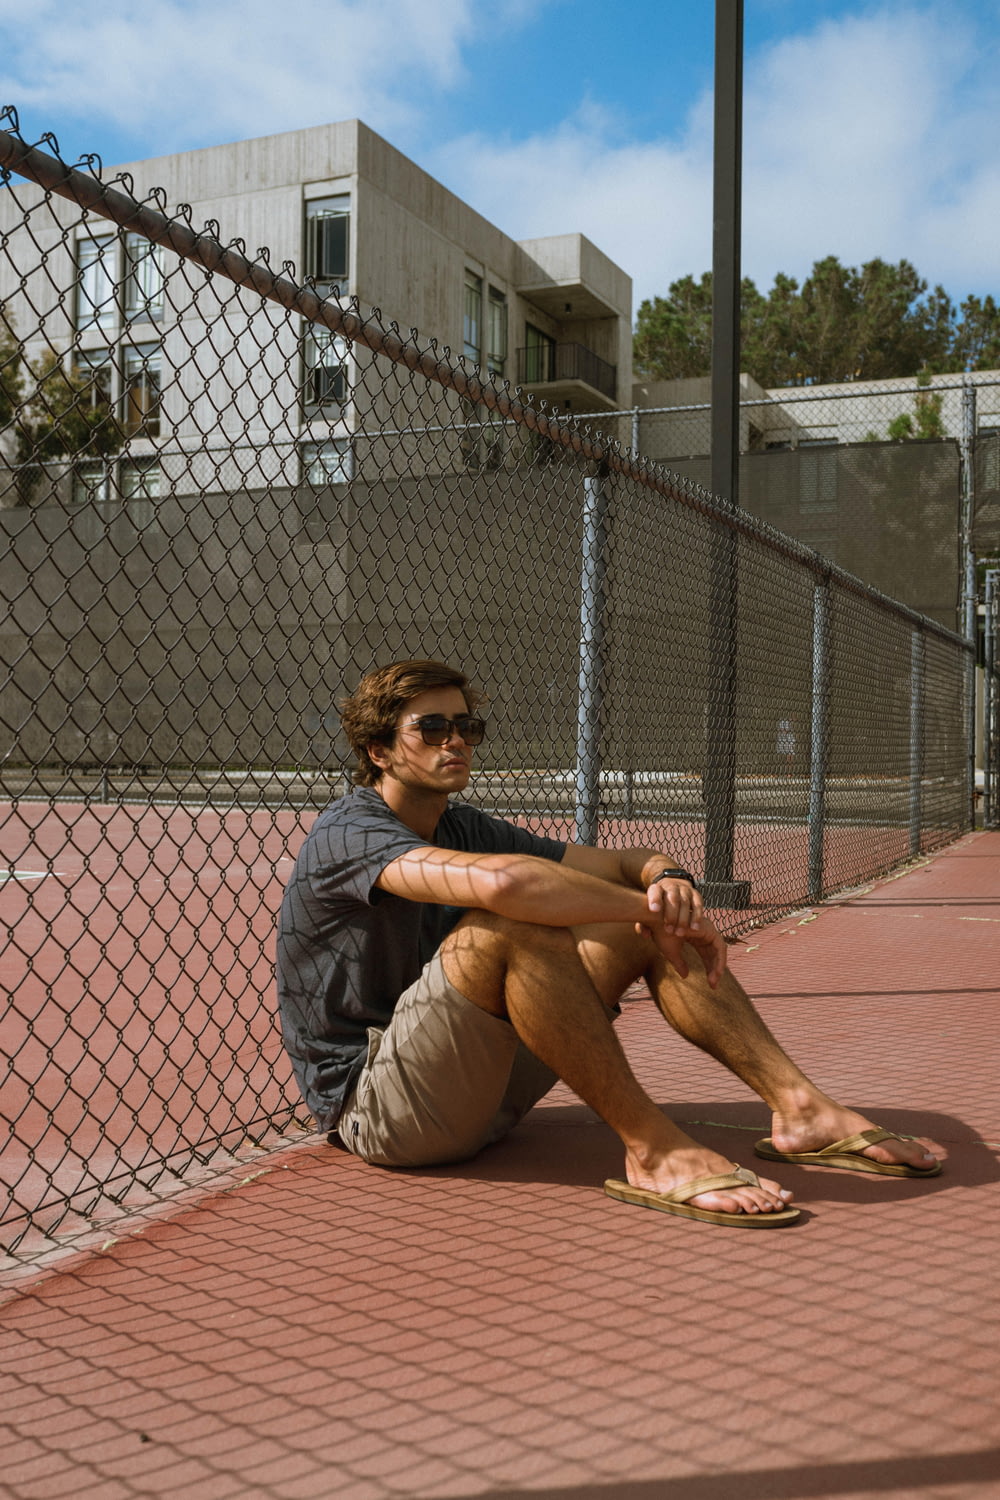 man wearing black crew-neck t-shirt sitting and leaning against chain link fence